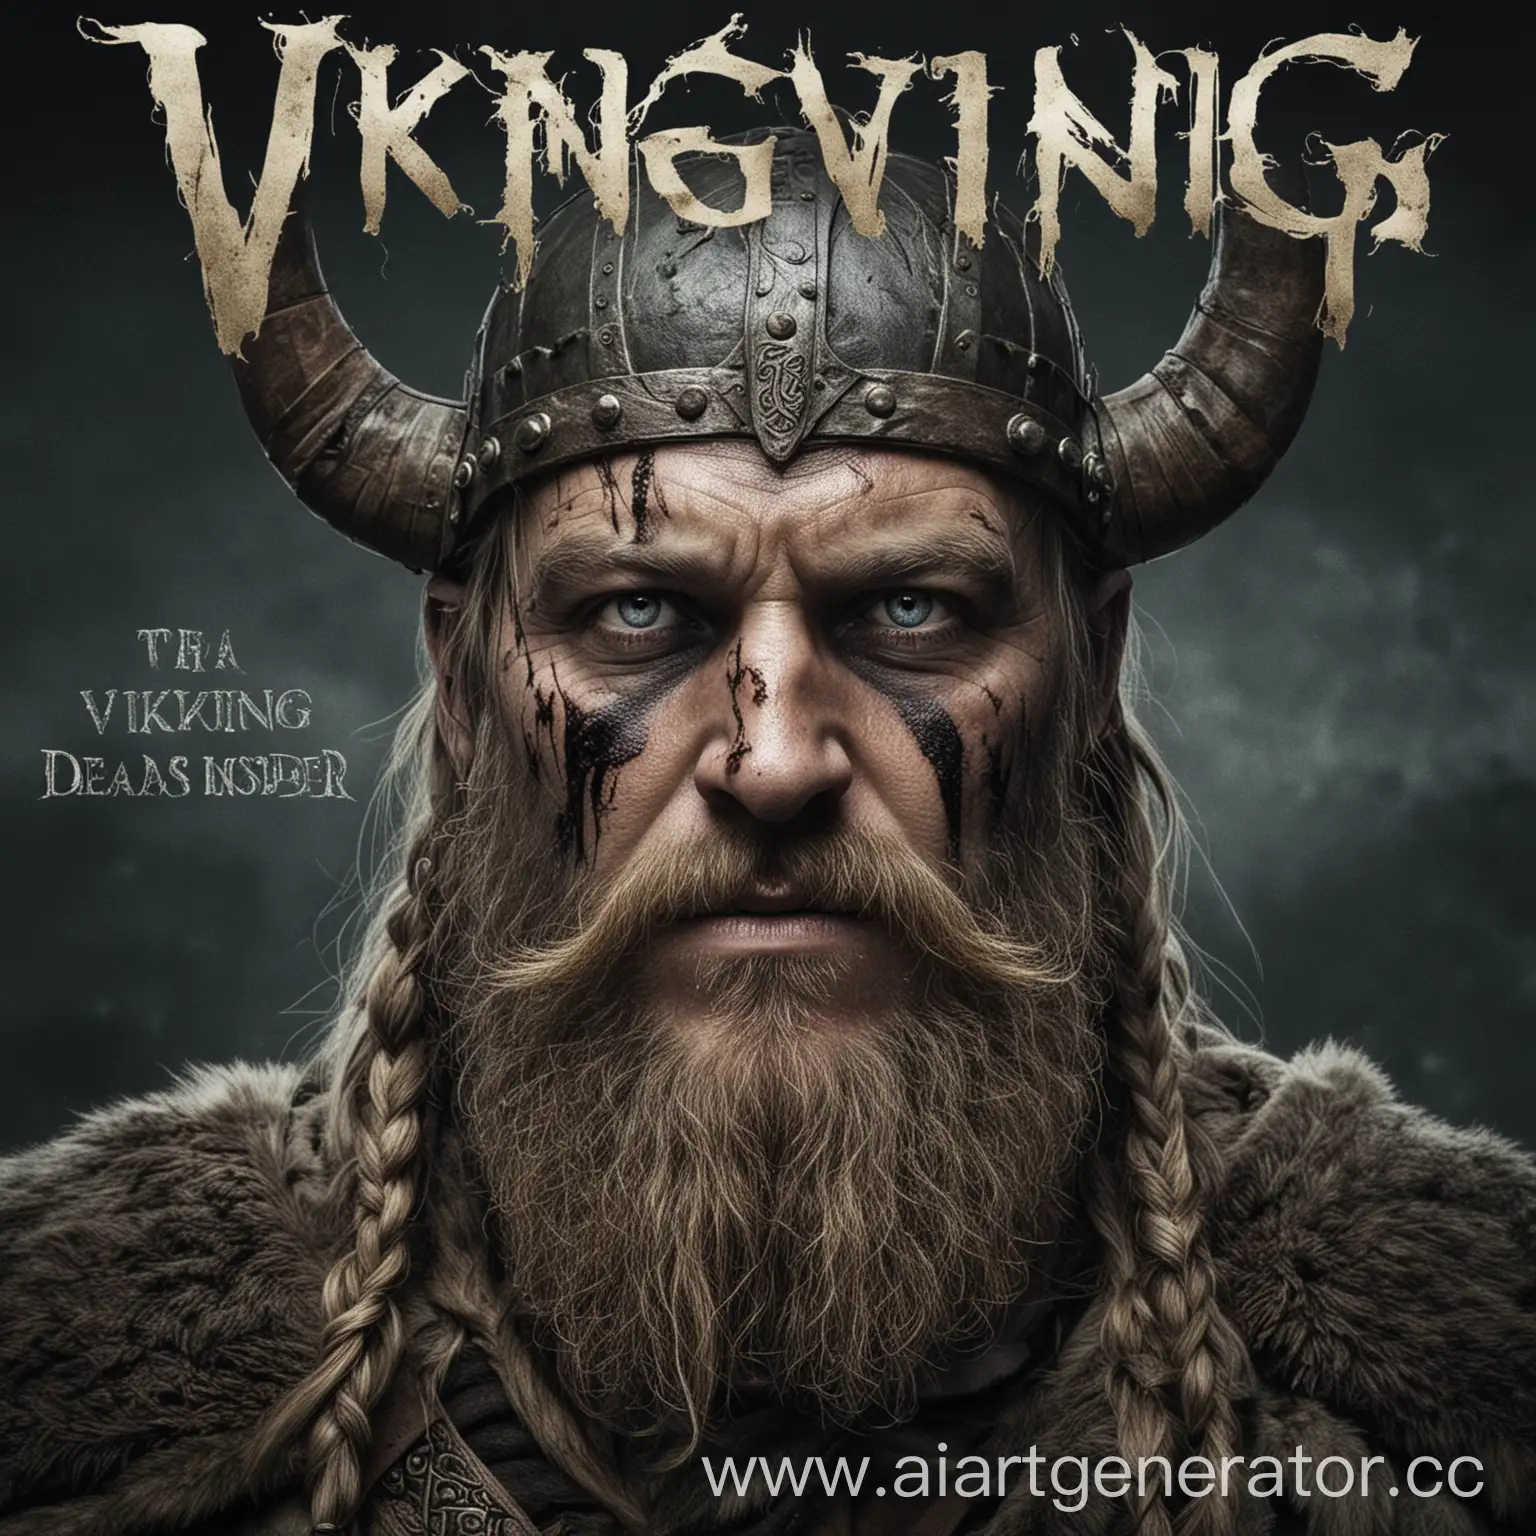 Viking-Funeral-Honoring-the-Fallen-Warrior-Amidst-Flames